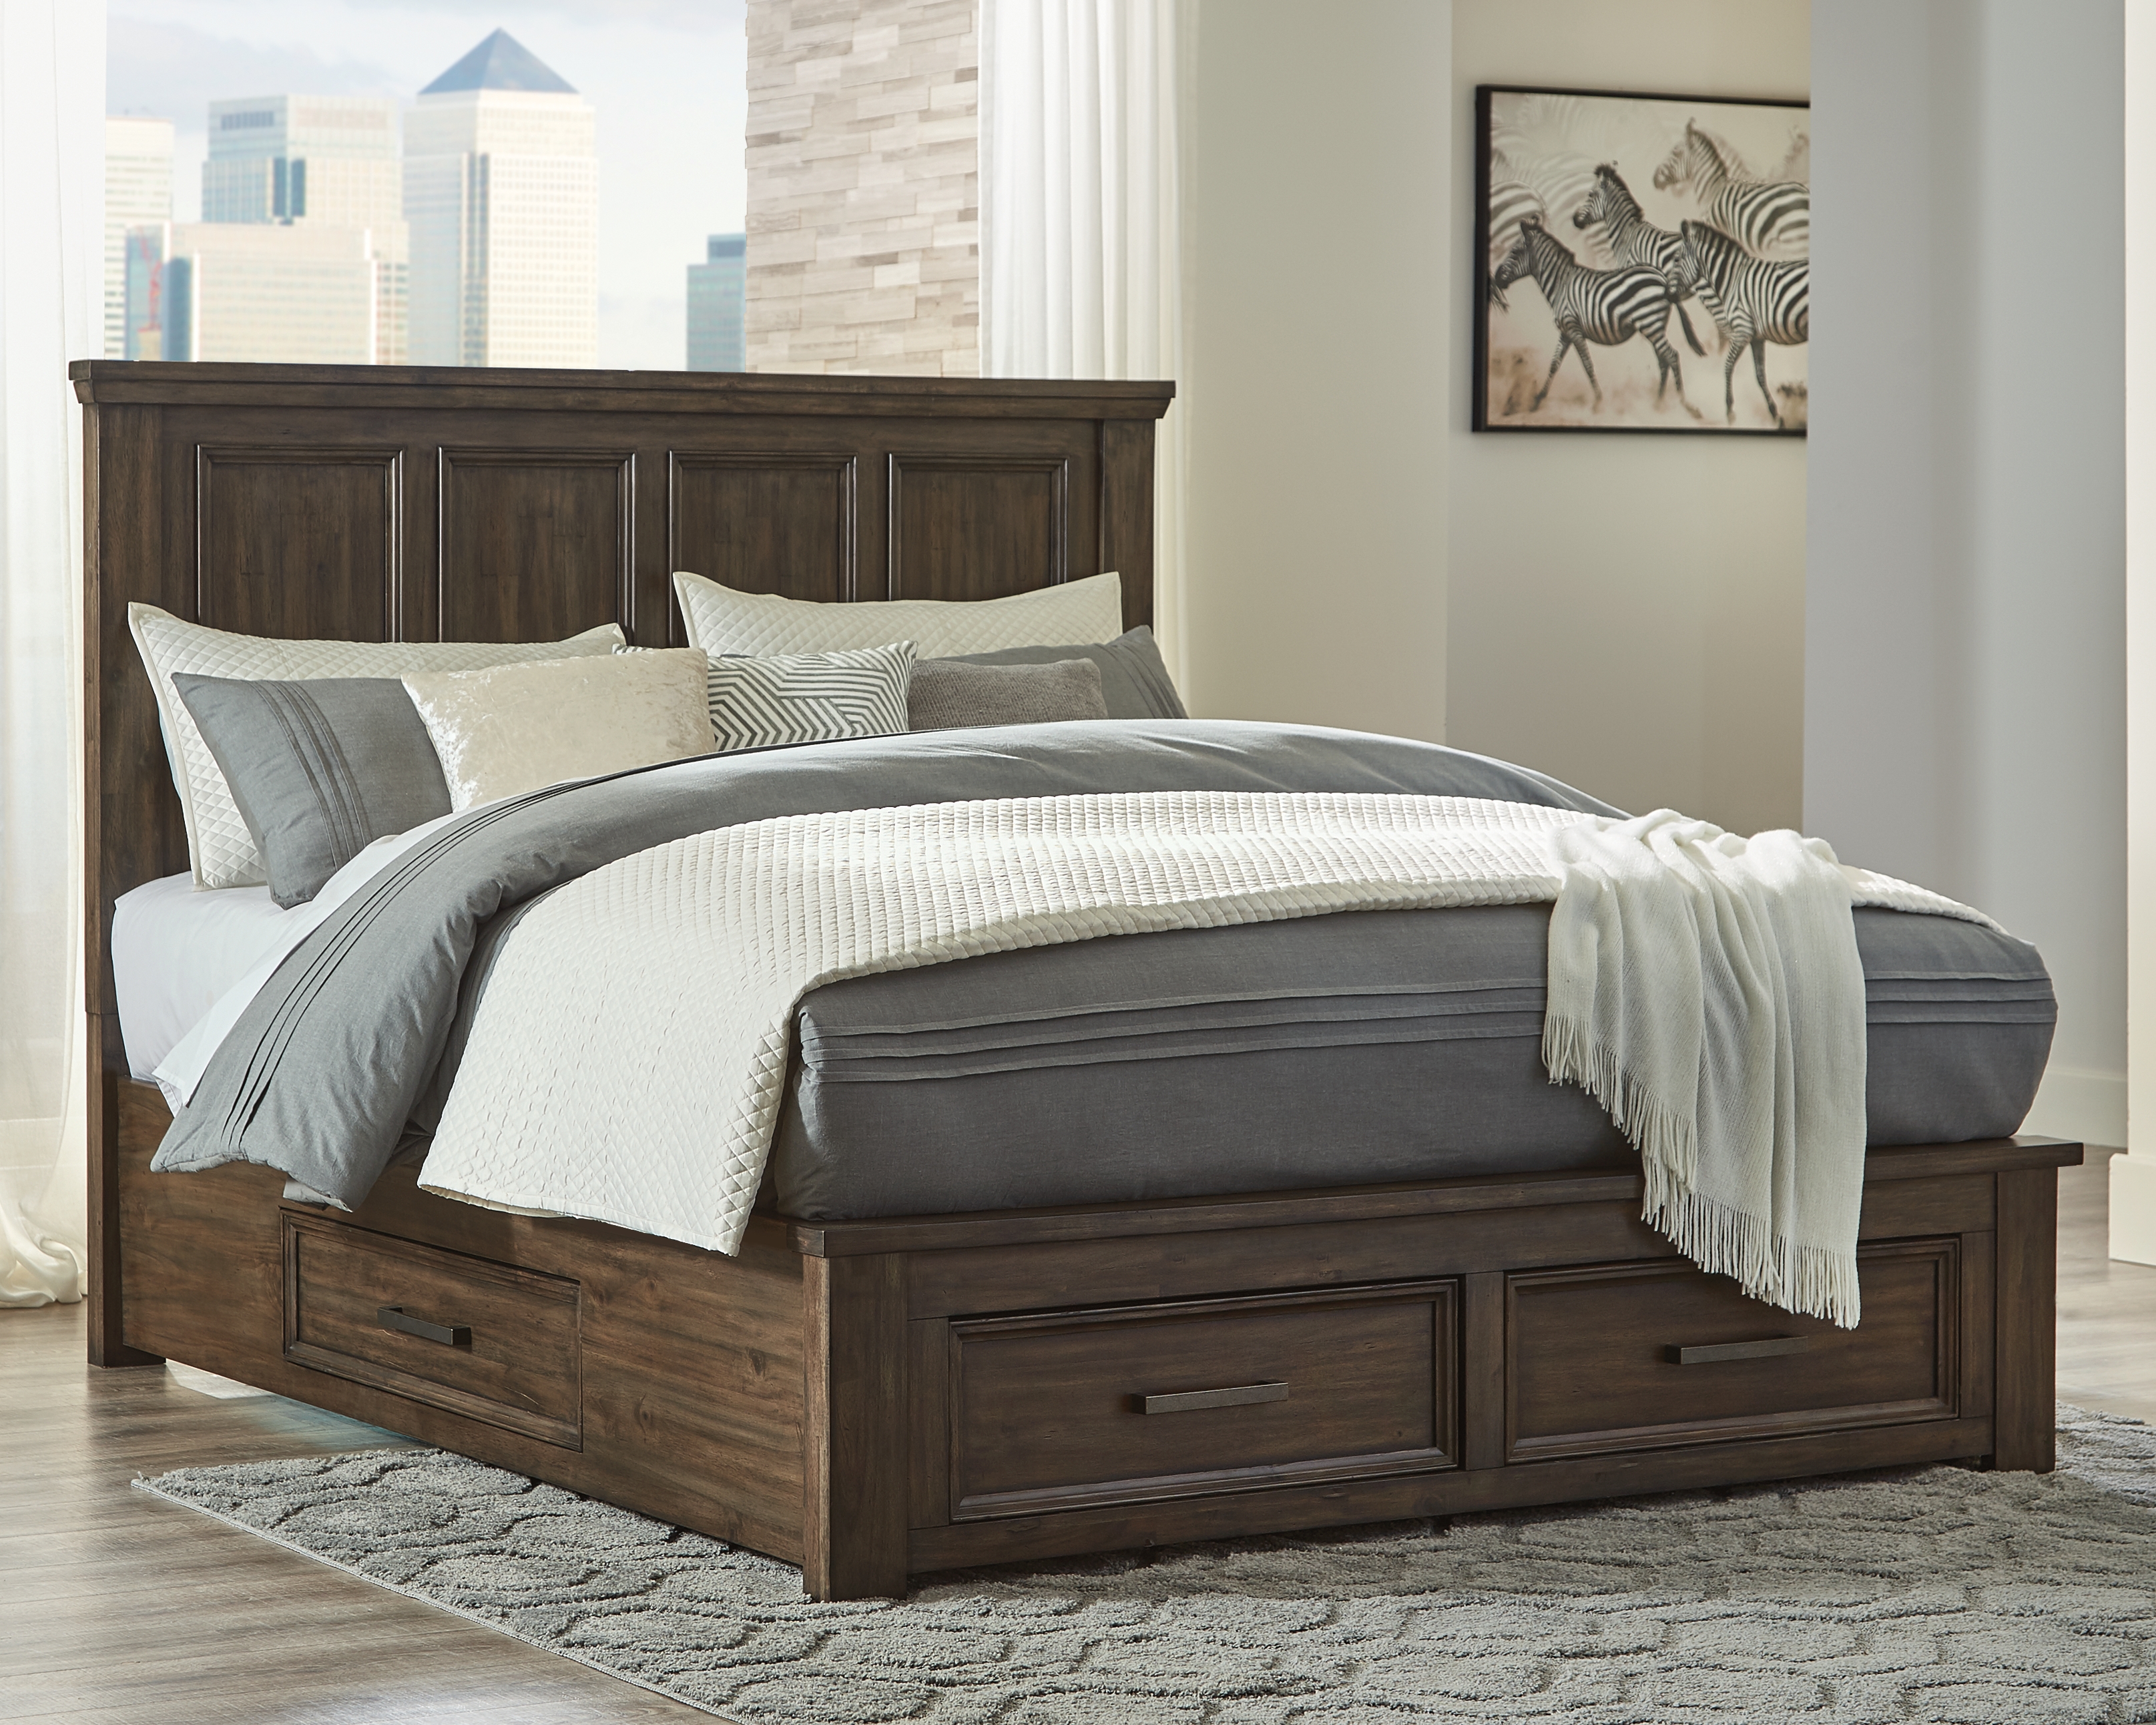 Johurst California King Panel Bed With, Cal King Bed Frame With Headboard And Storage